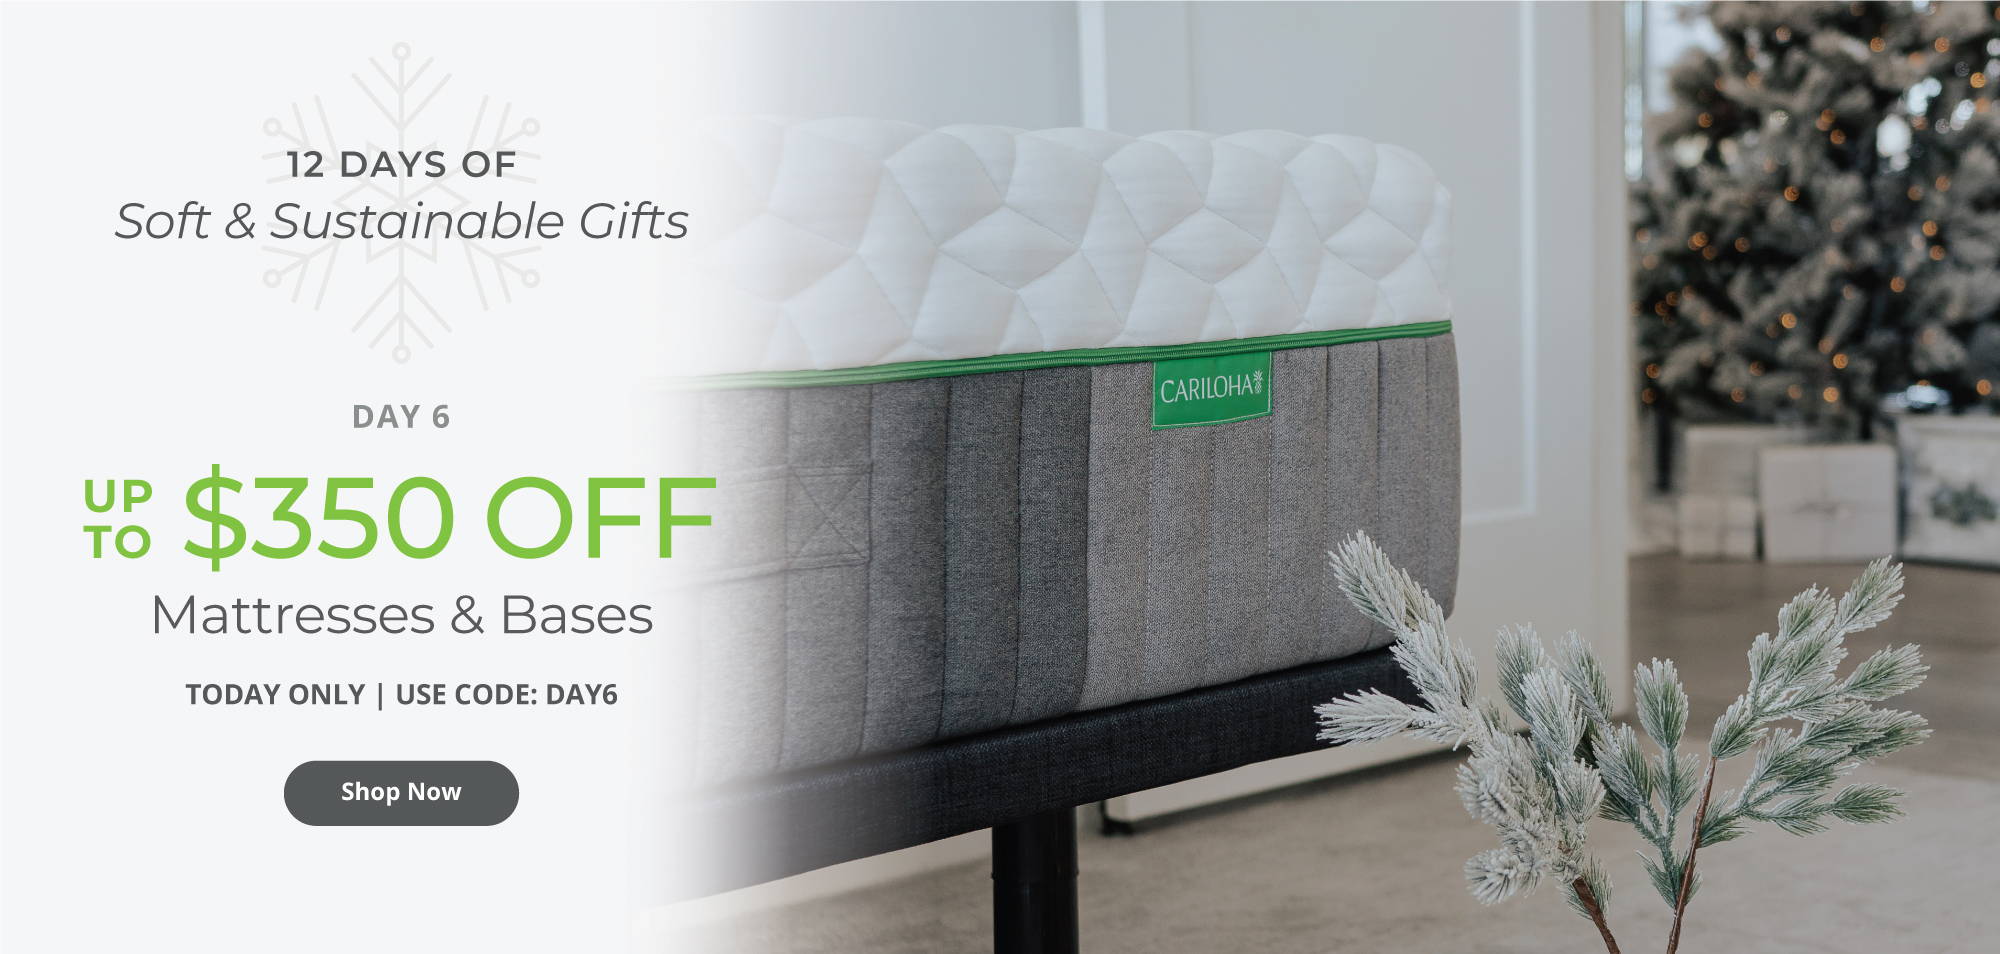 Up to $350 off mattresses and bases